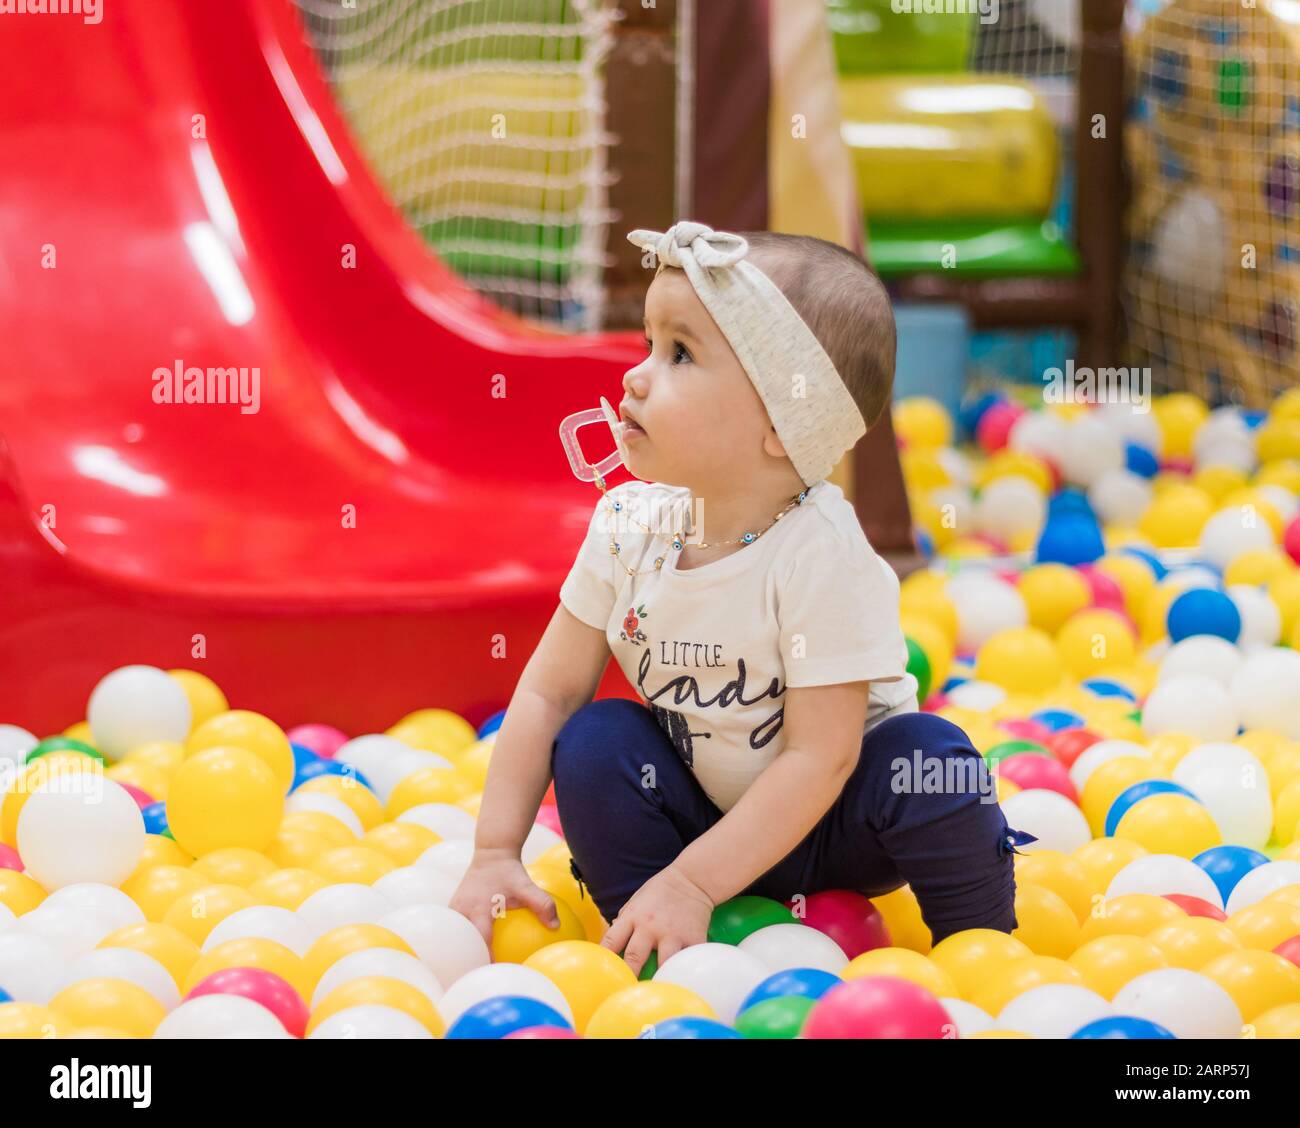 a cute little girl playing in the indoor playground in a shopping centre. Stock Photo